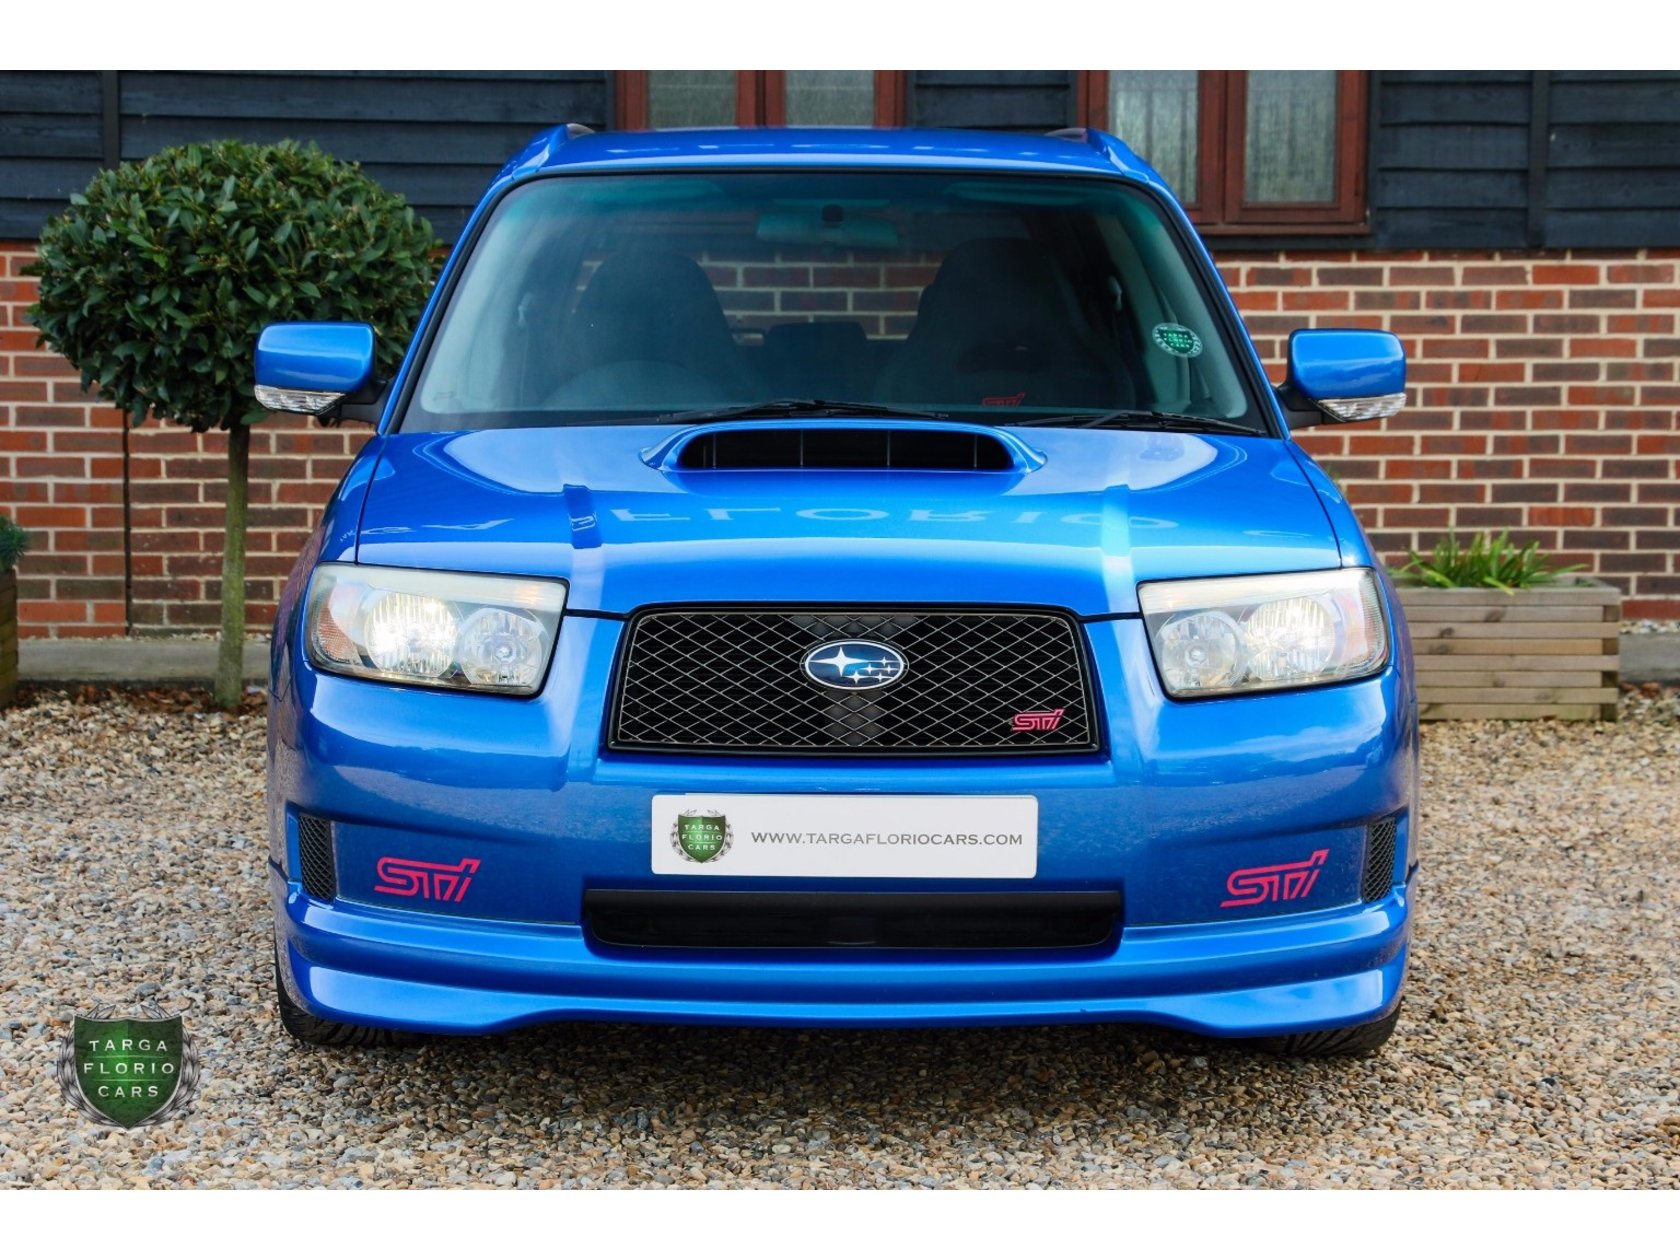 2005 1/2 WRB Forester STi with 37k miles in the UK